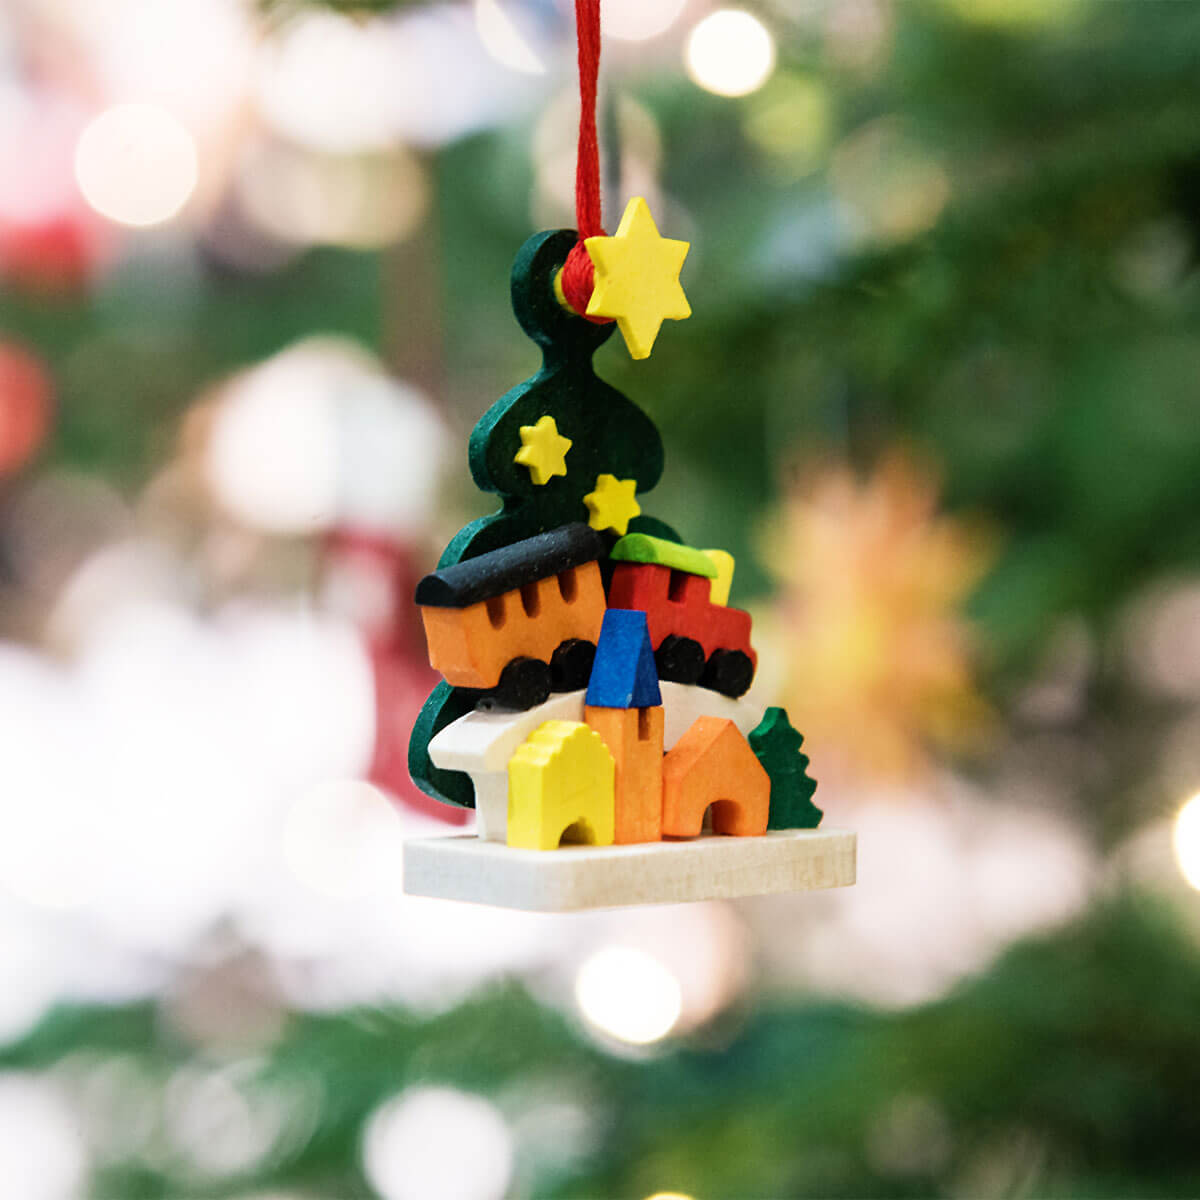 Christmas Tree & Gifts Ornament with train